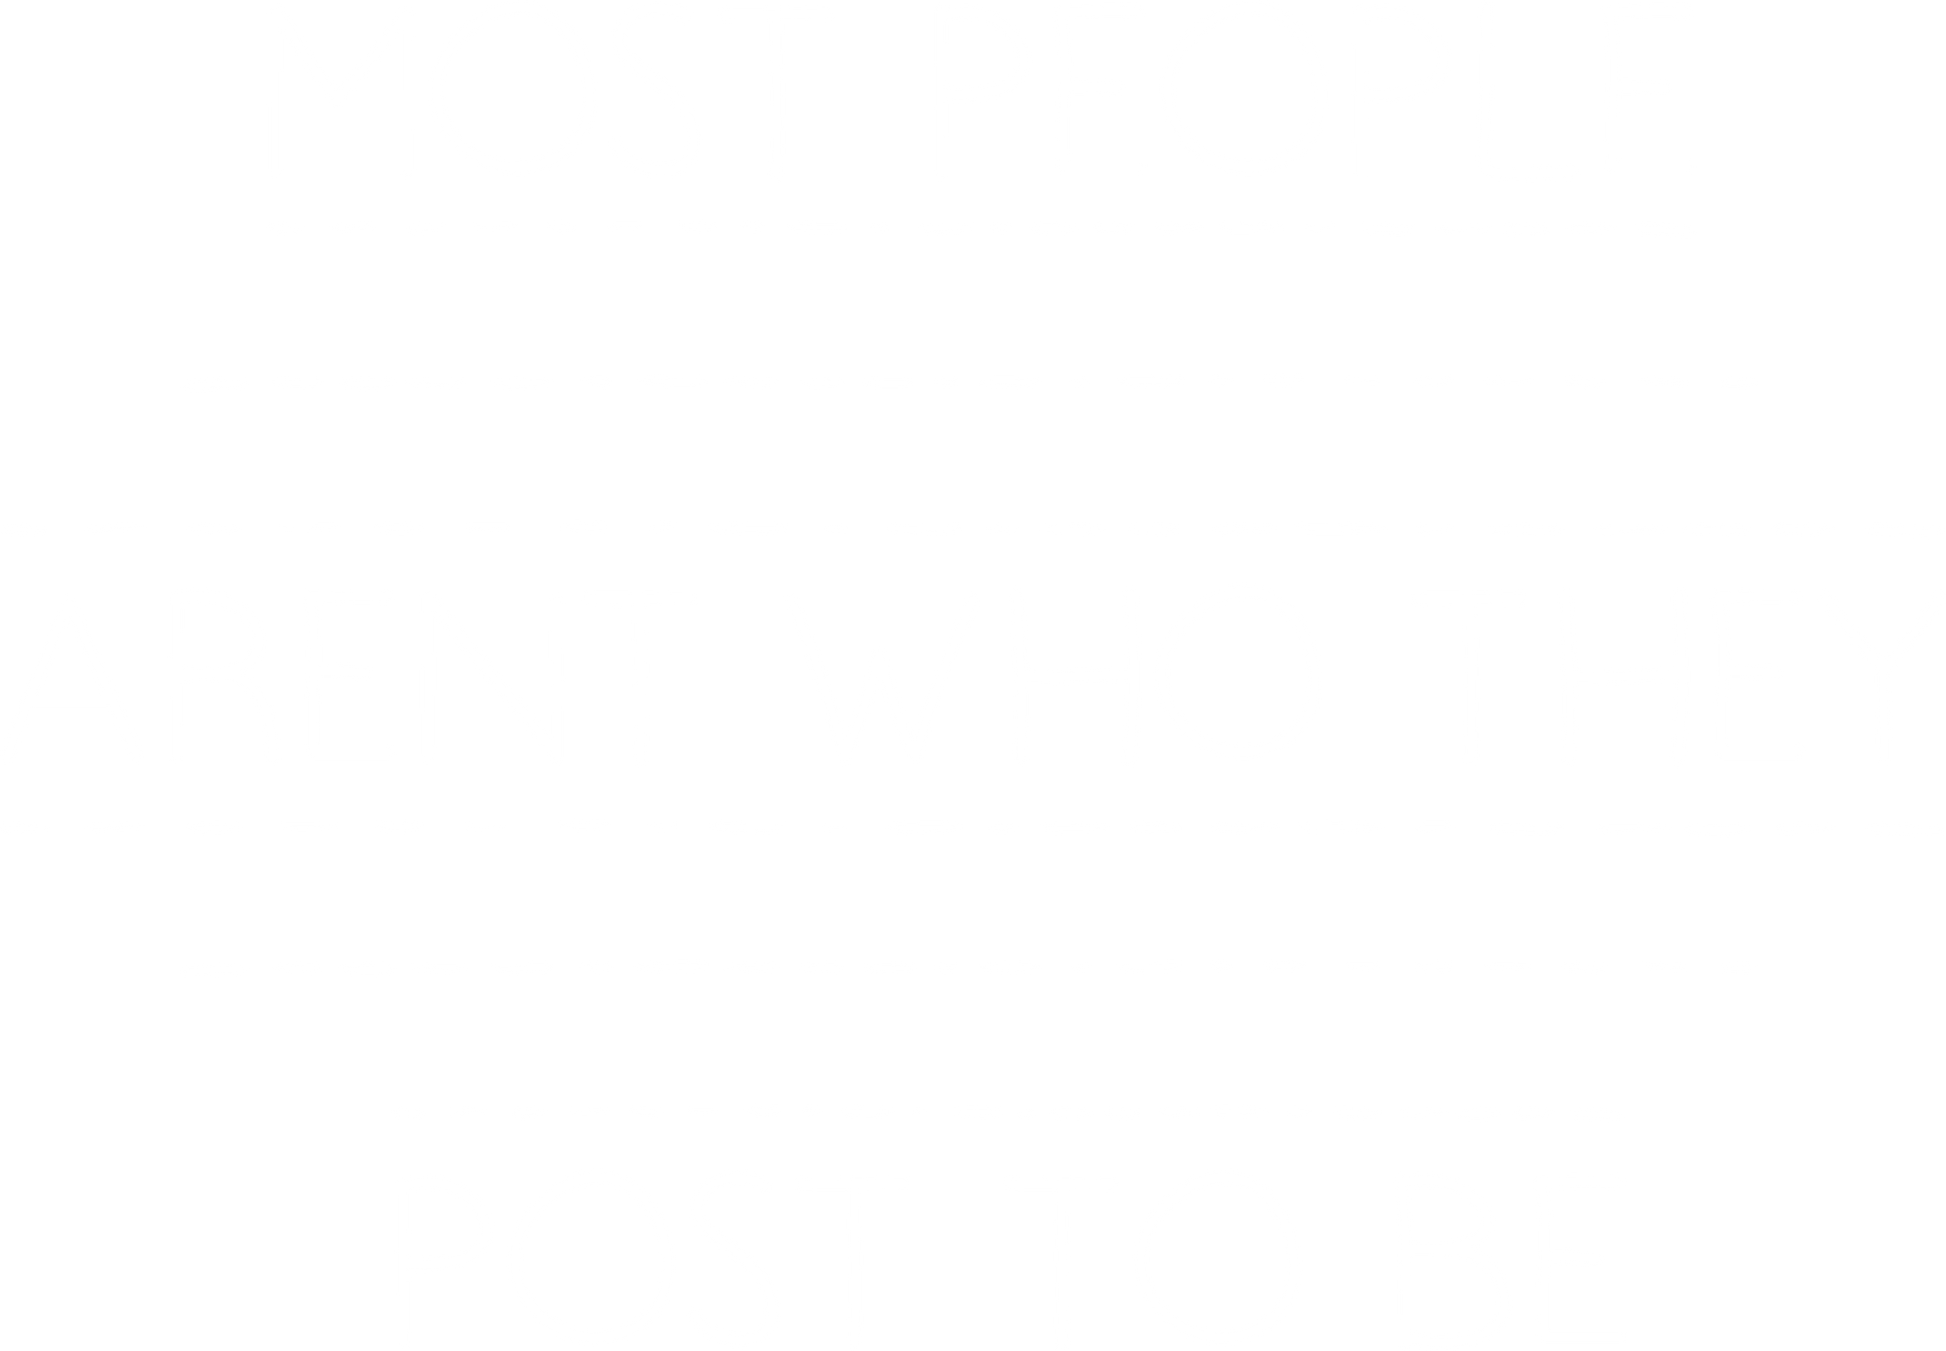 Most People Aren't Who They Post To Be